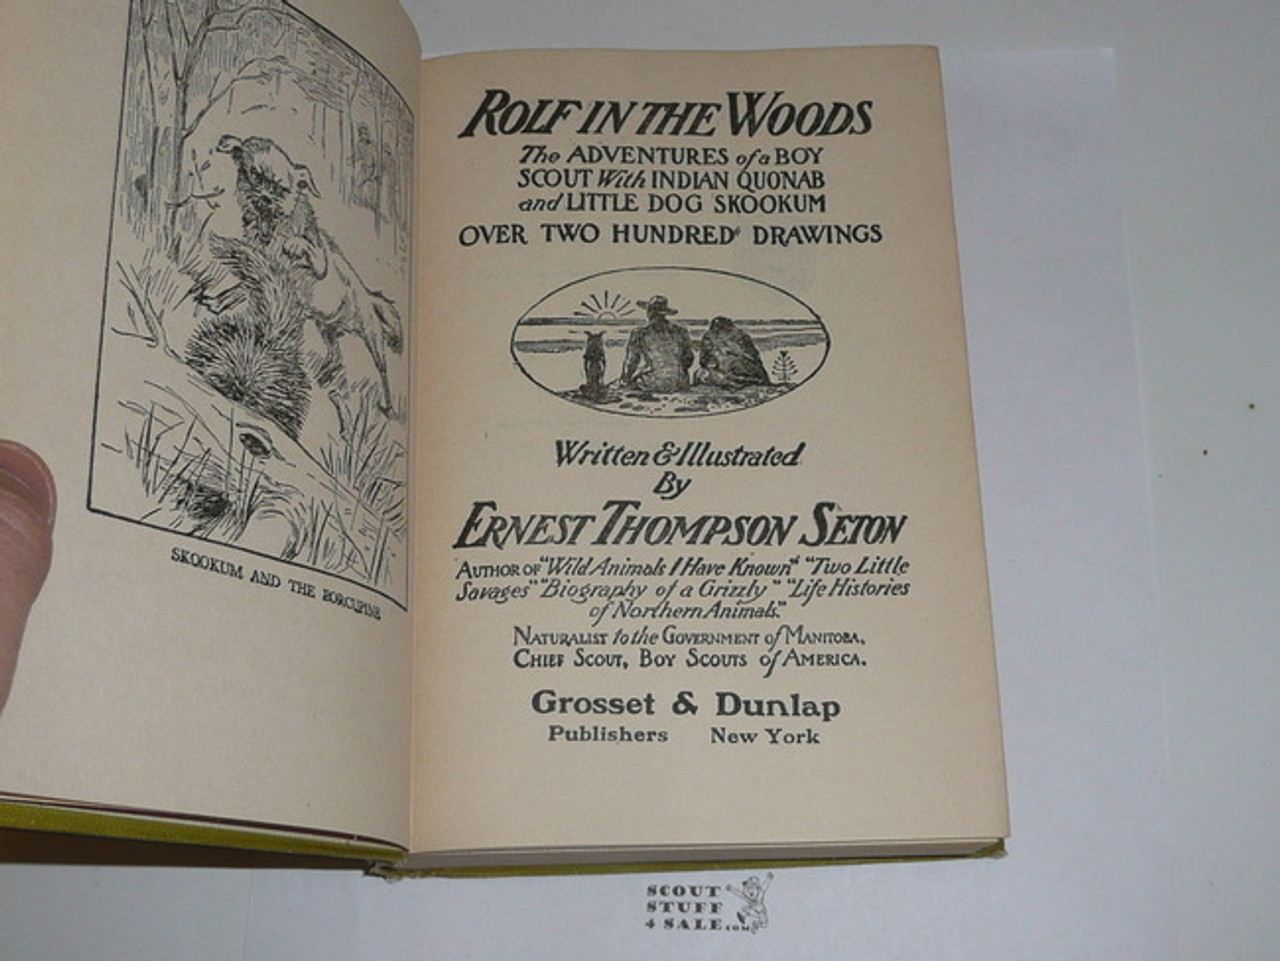 1911 Rolf in the Woods, By Ernest Thompson Seton, first printing, dedicated to the Boy Scouts of America